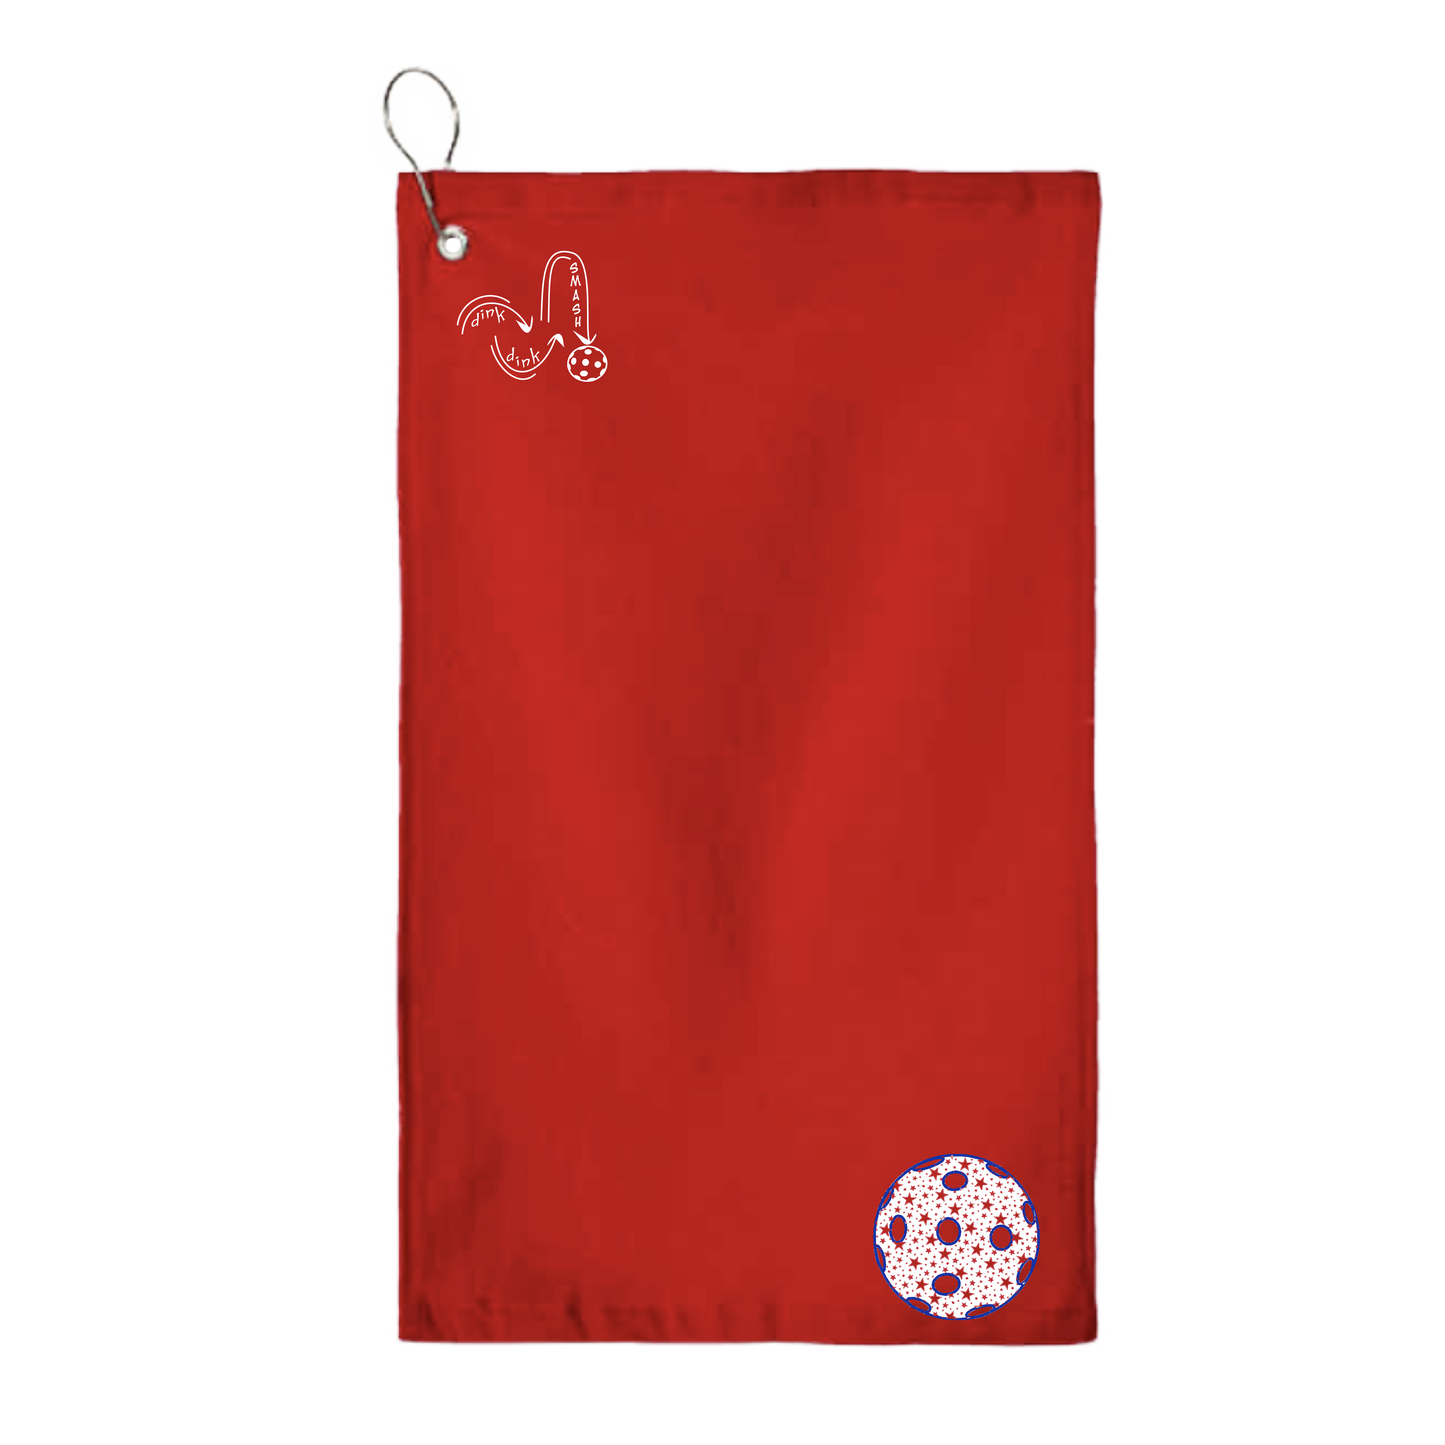 Pickleballs (Customizable) | Pickleball Court Towels | Grommeted 100% Cotton Terry Velour